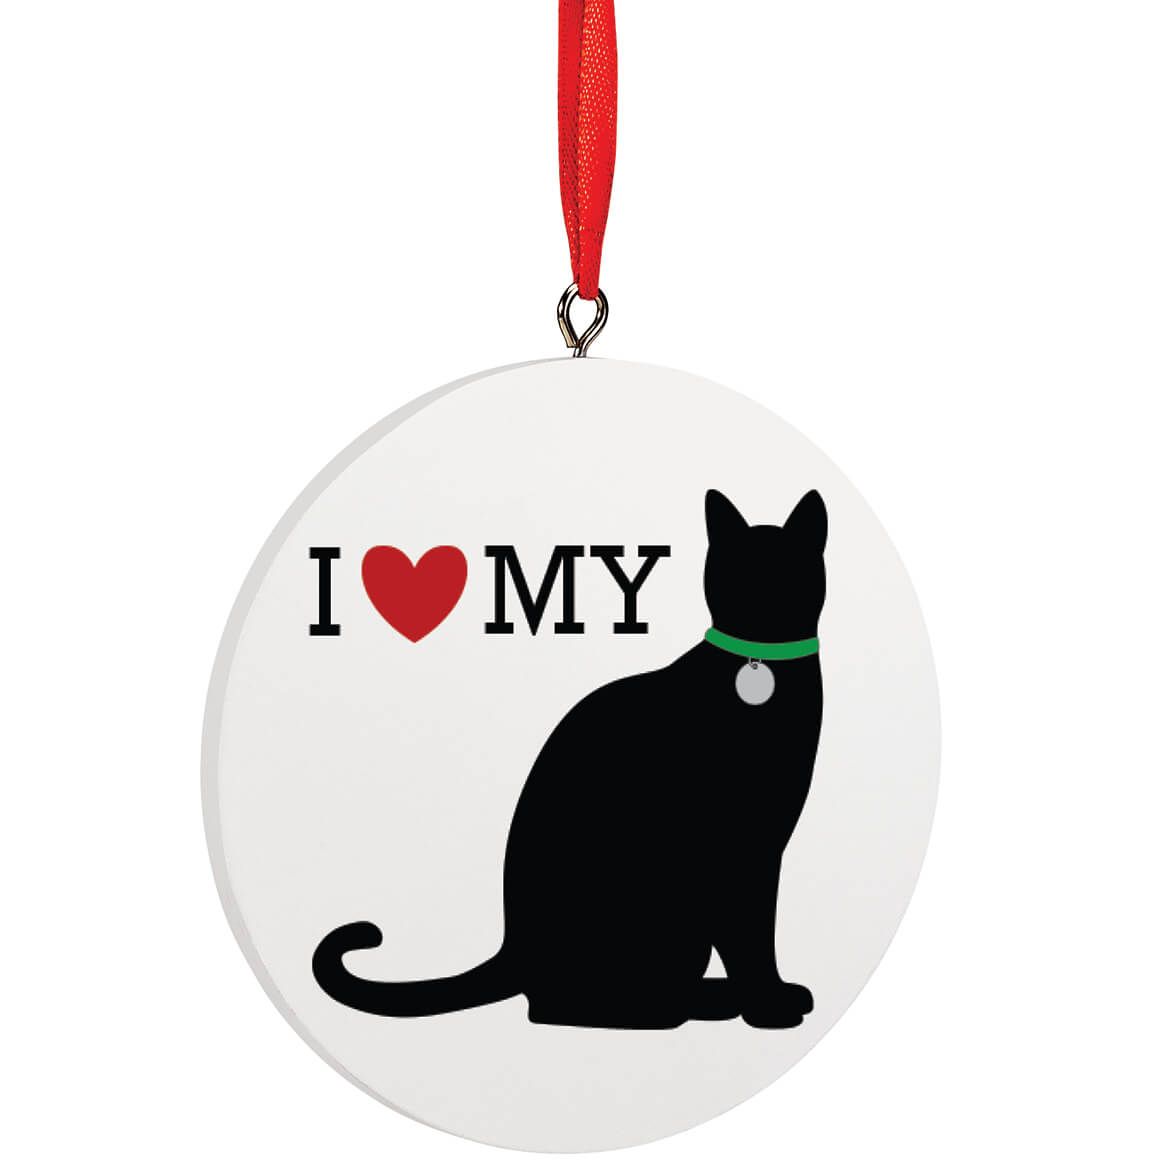 Personalized I Love My Cat Ornament + '-' + 372728